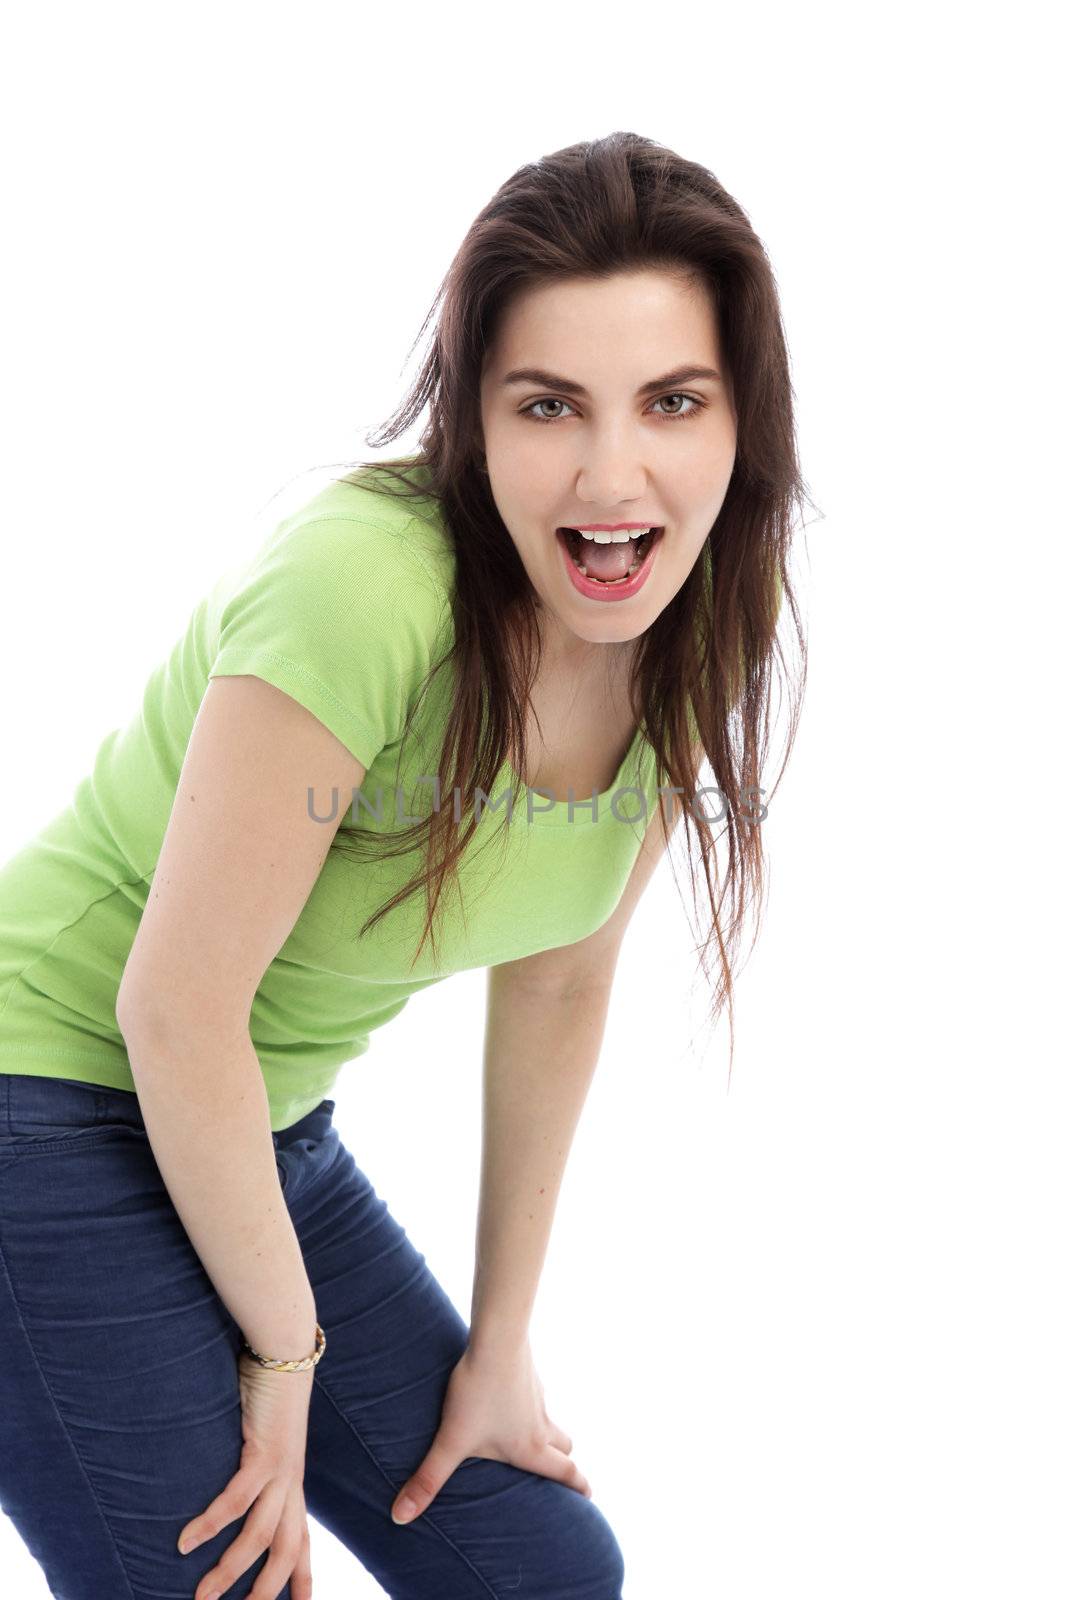 Brunette female in green shirt and jeans against the white background